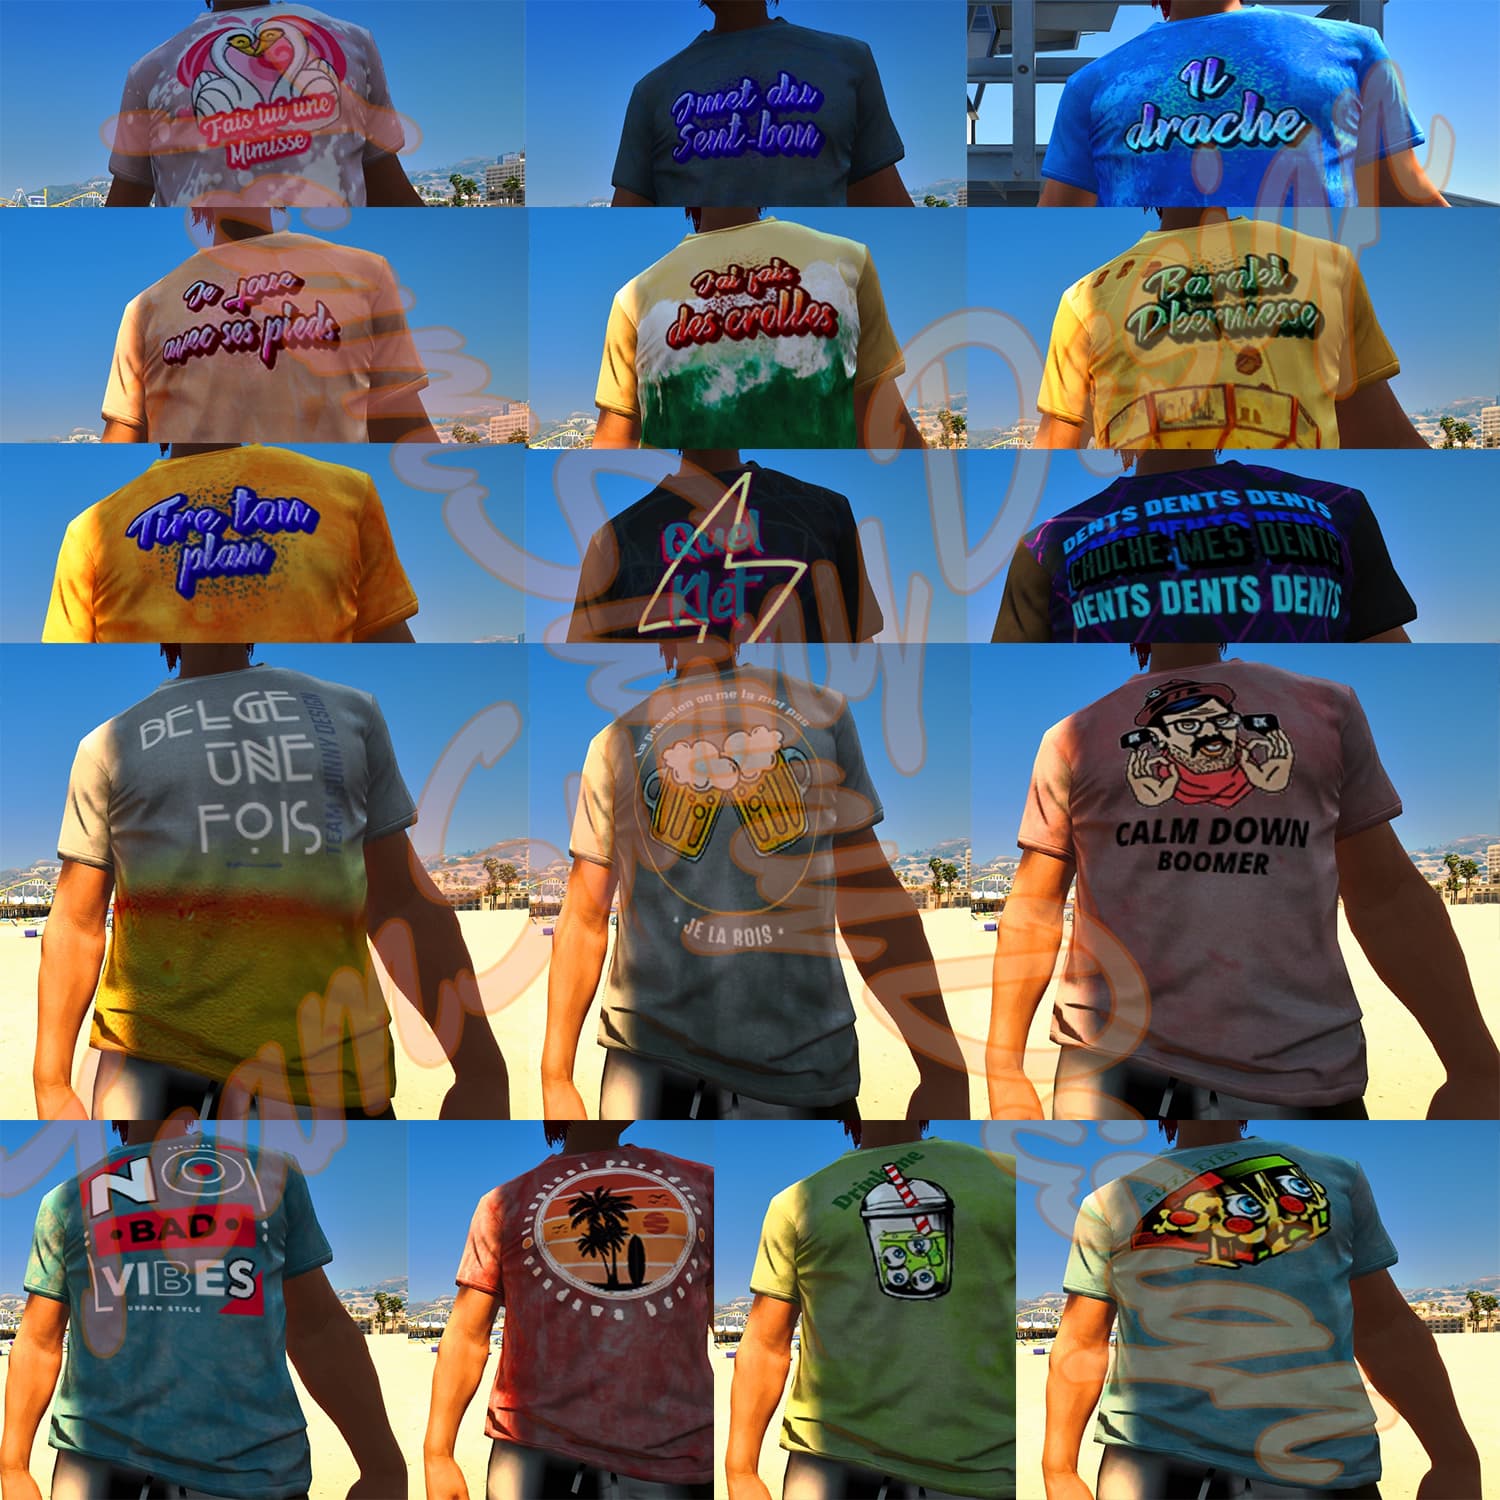 [RELEASE][PAID]Pack of 16 tshirts Men[OPTIMISATION] - Releases - Cfx.re ...